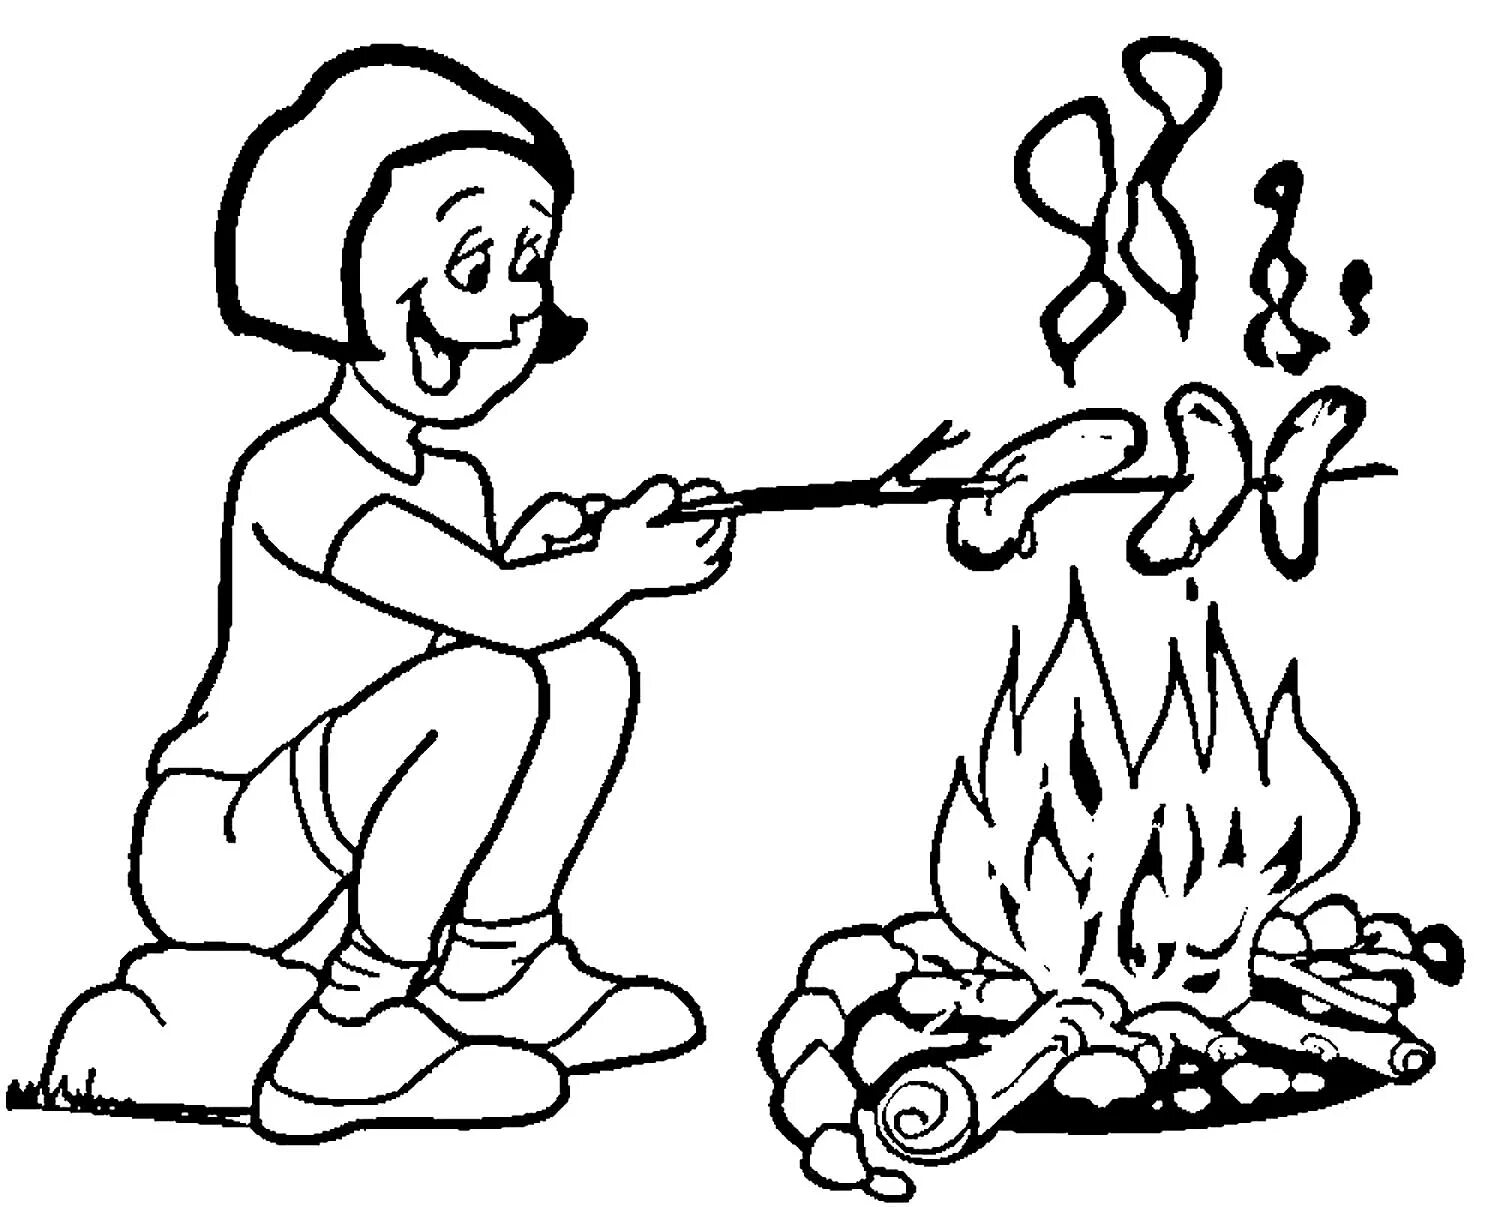 Colorful fire enemy coloring page